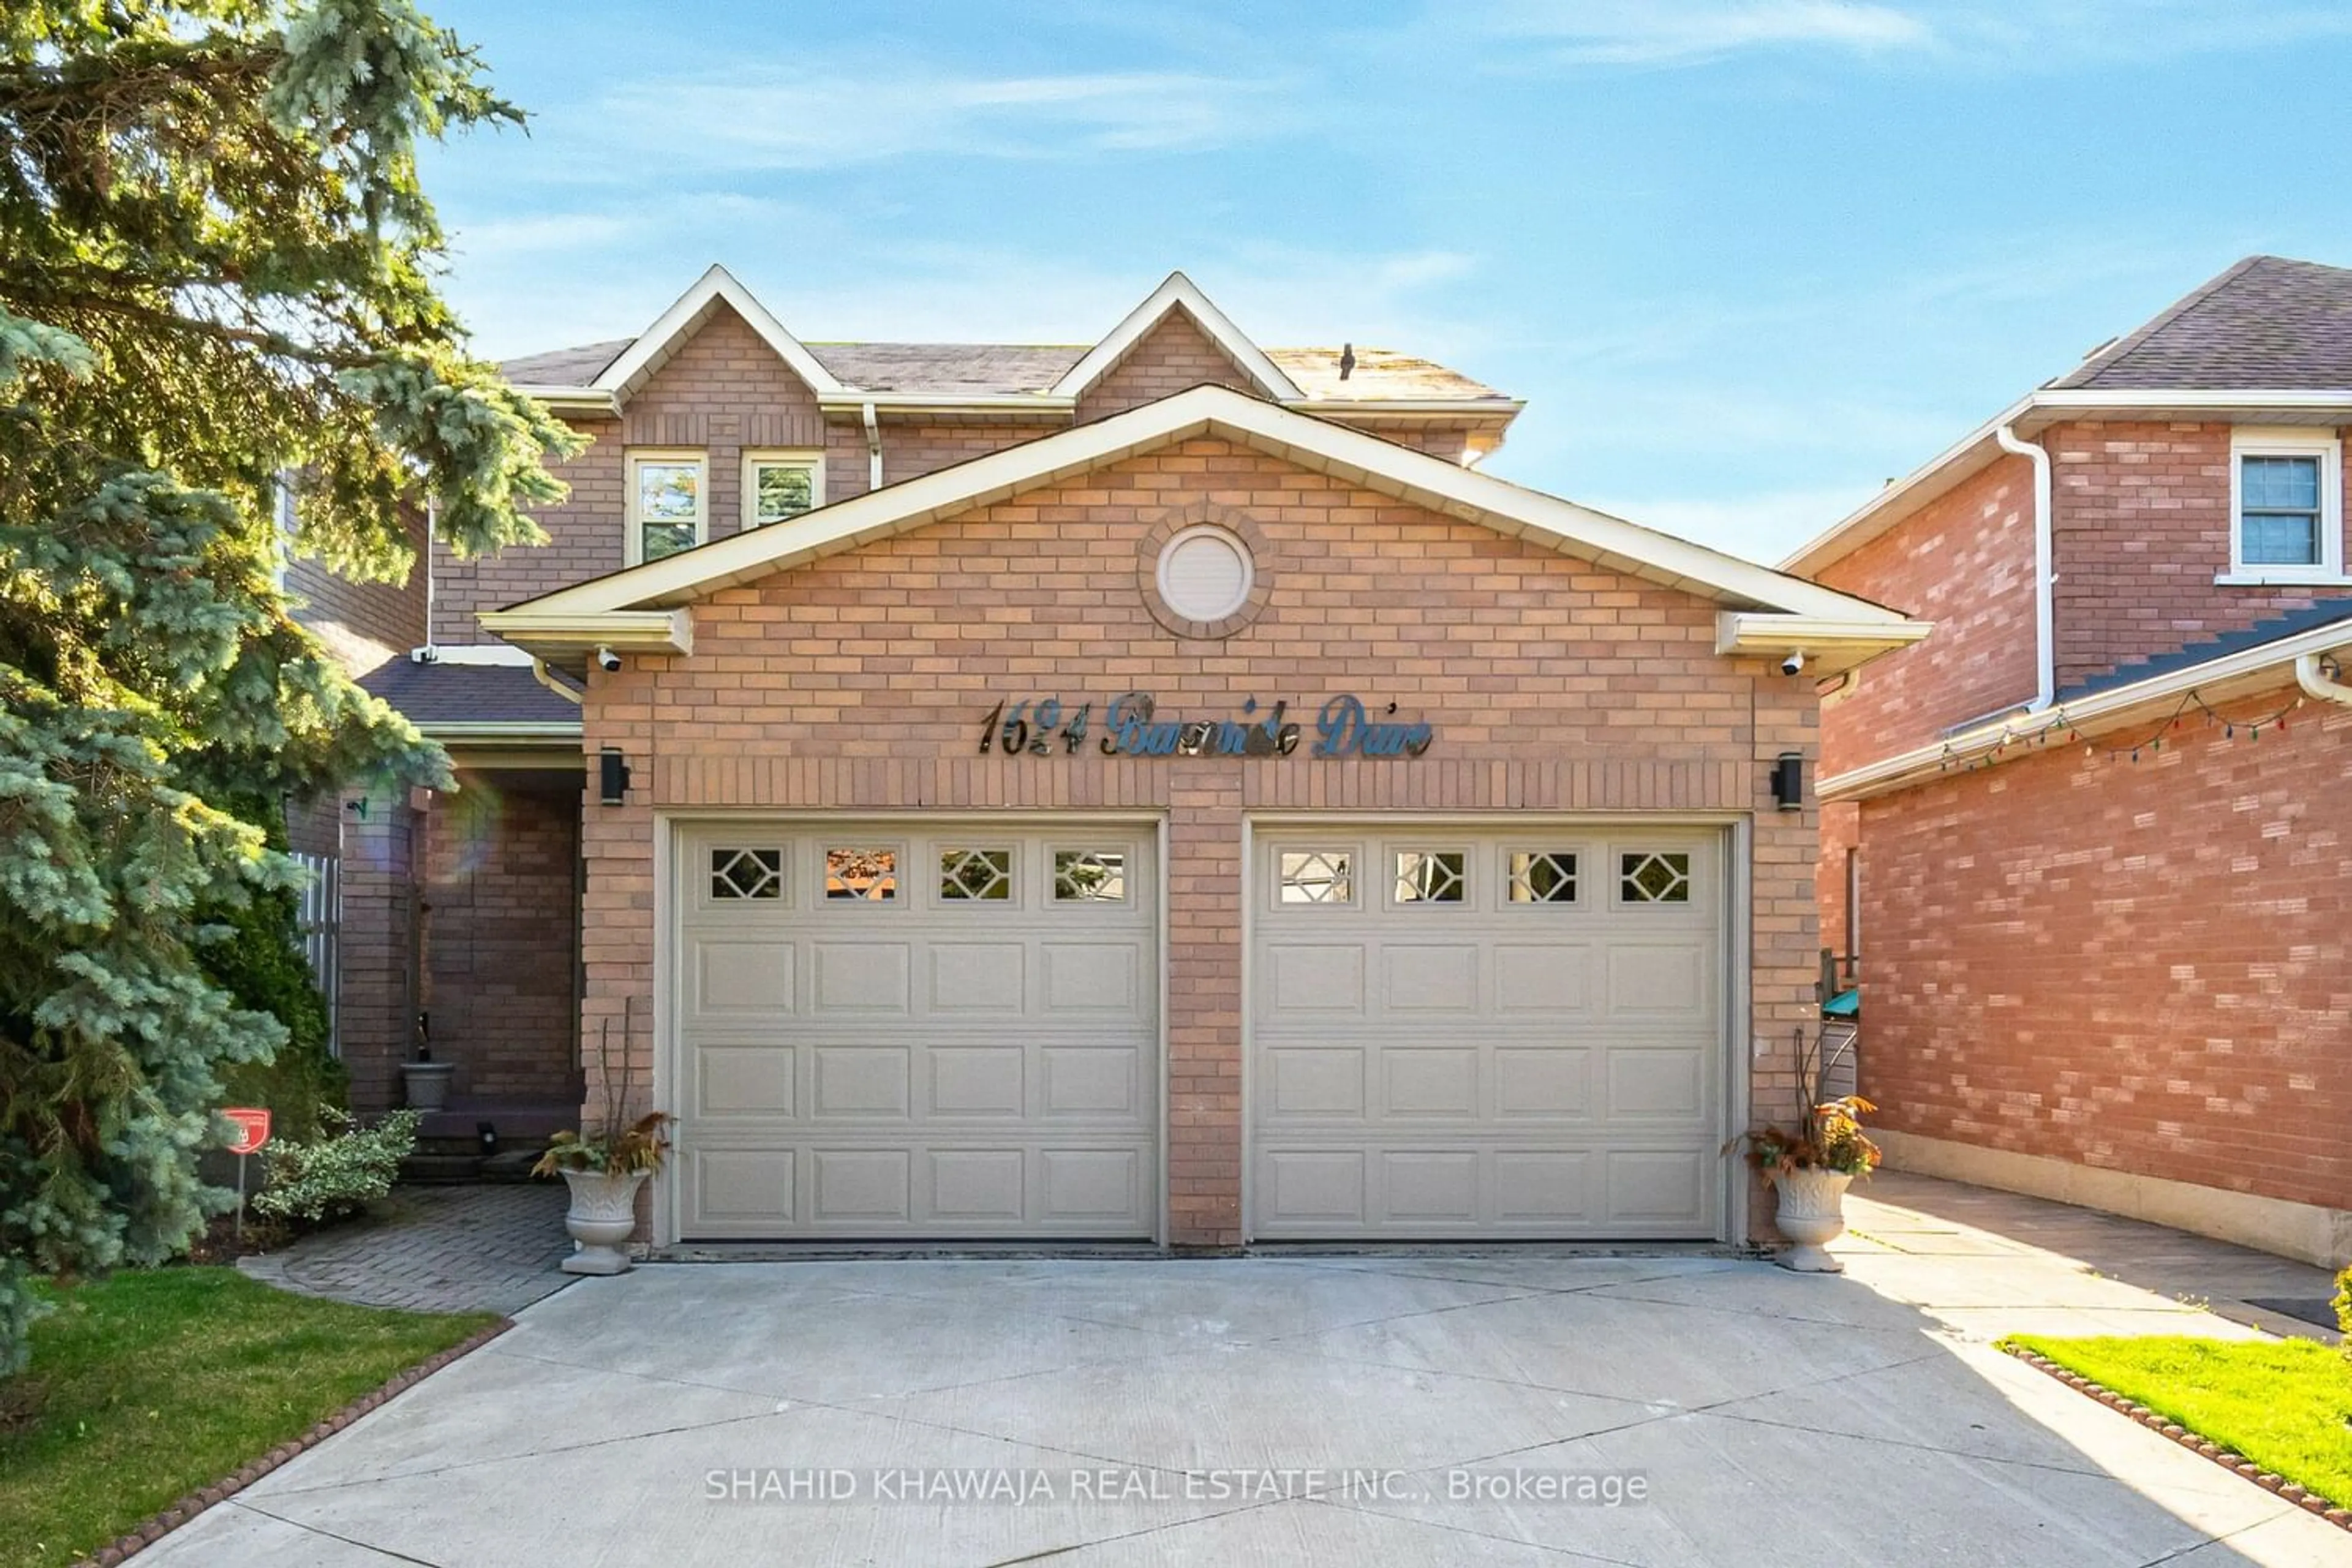 Home with brick exterior material for 1624 Burnside Dr, Pickering Ontario L1V 6L6